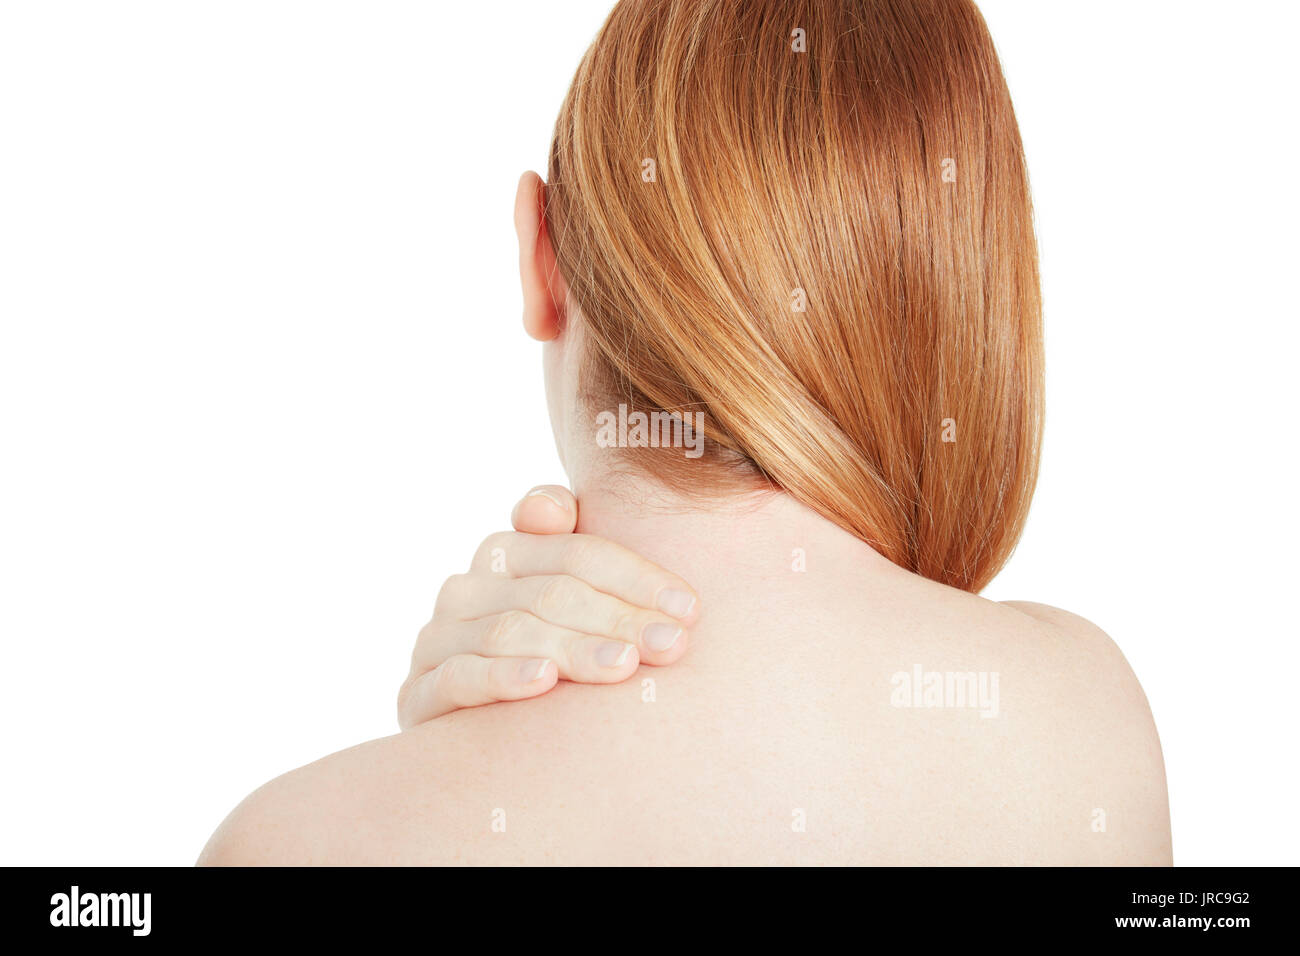 Neck pain, woman holding hand on painful area isolated on white, clipping path Stock Photo